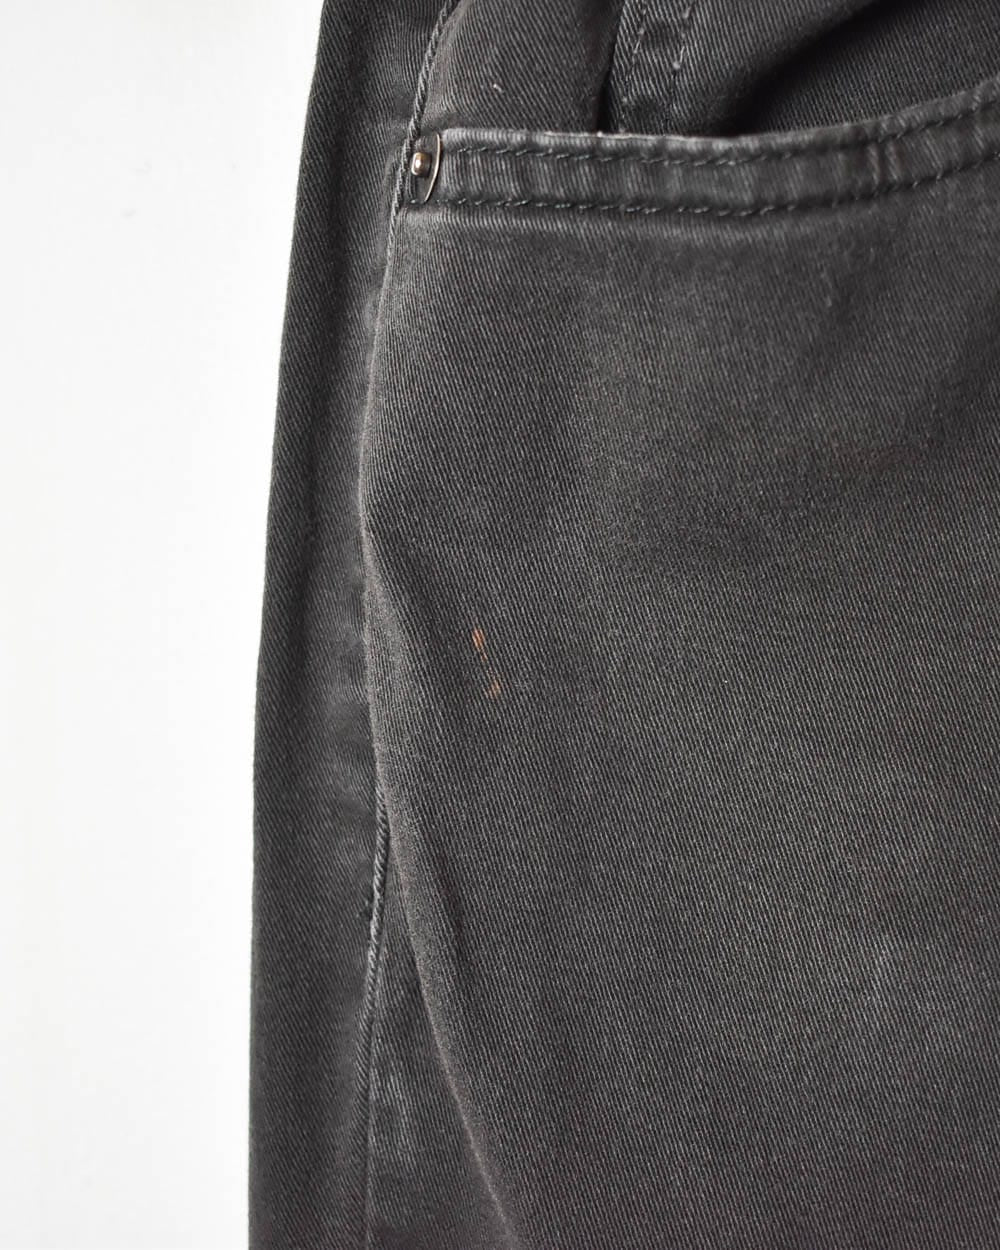 Black Dickies Lightly Distressed Trousers - W32 L29